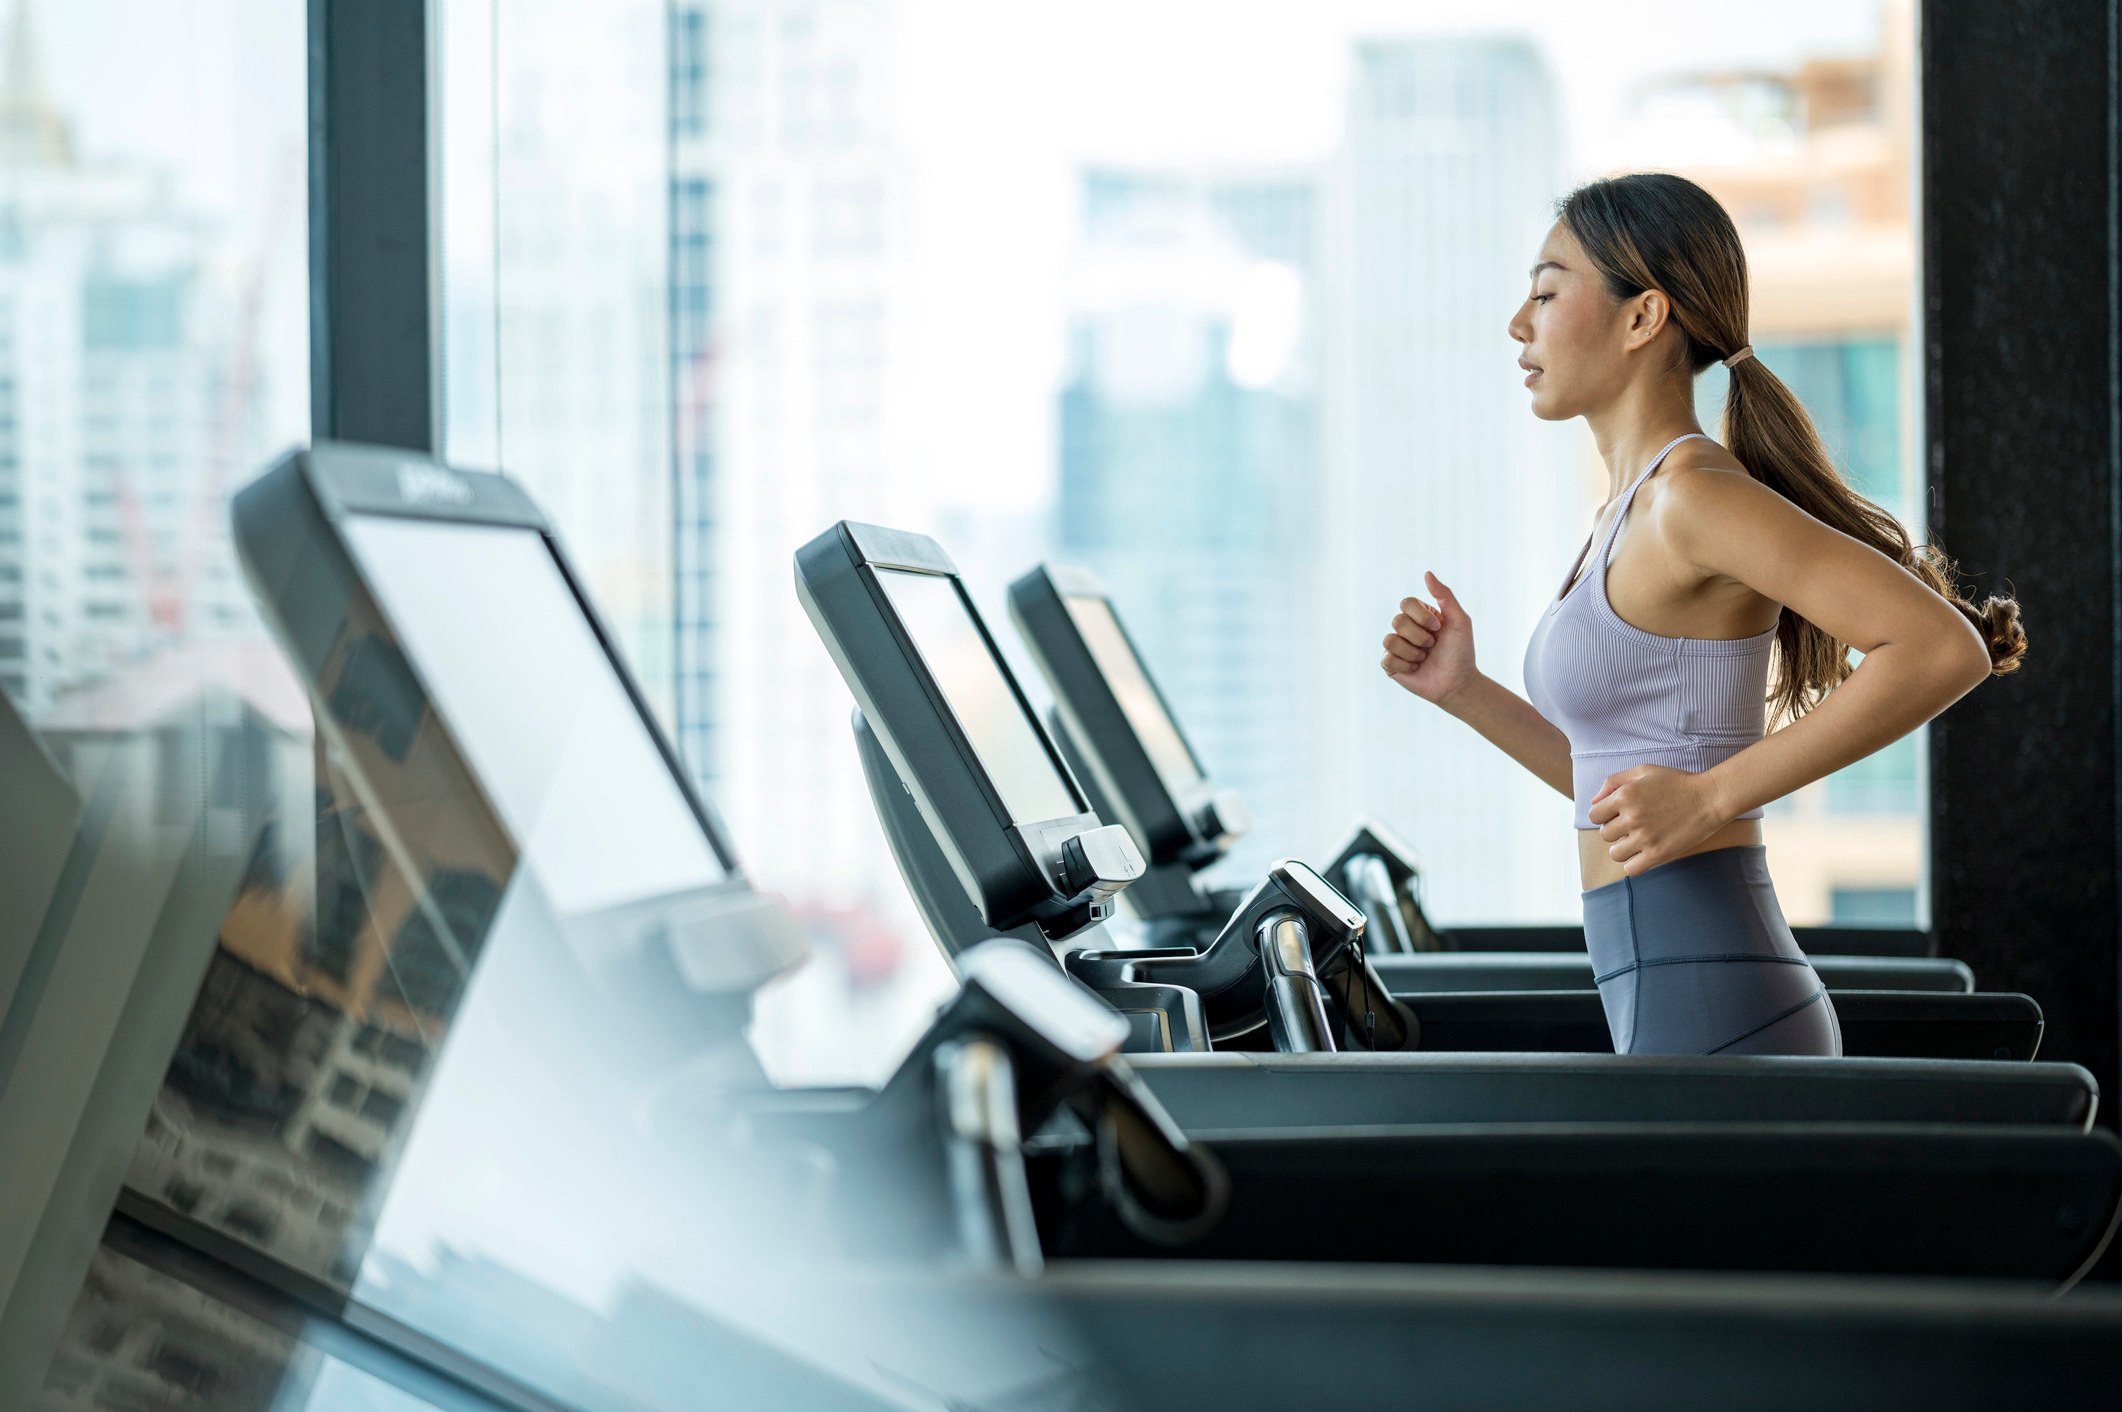 Is running on a treadmill bad for your joints? Photo: Getty Images